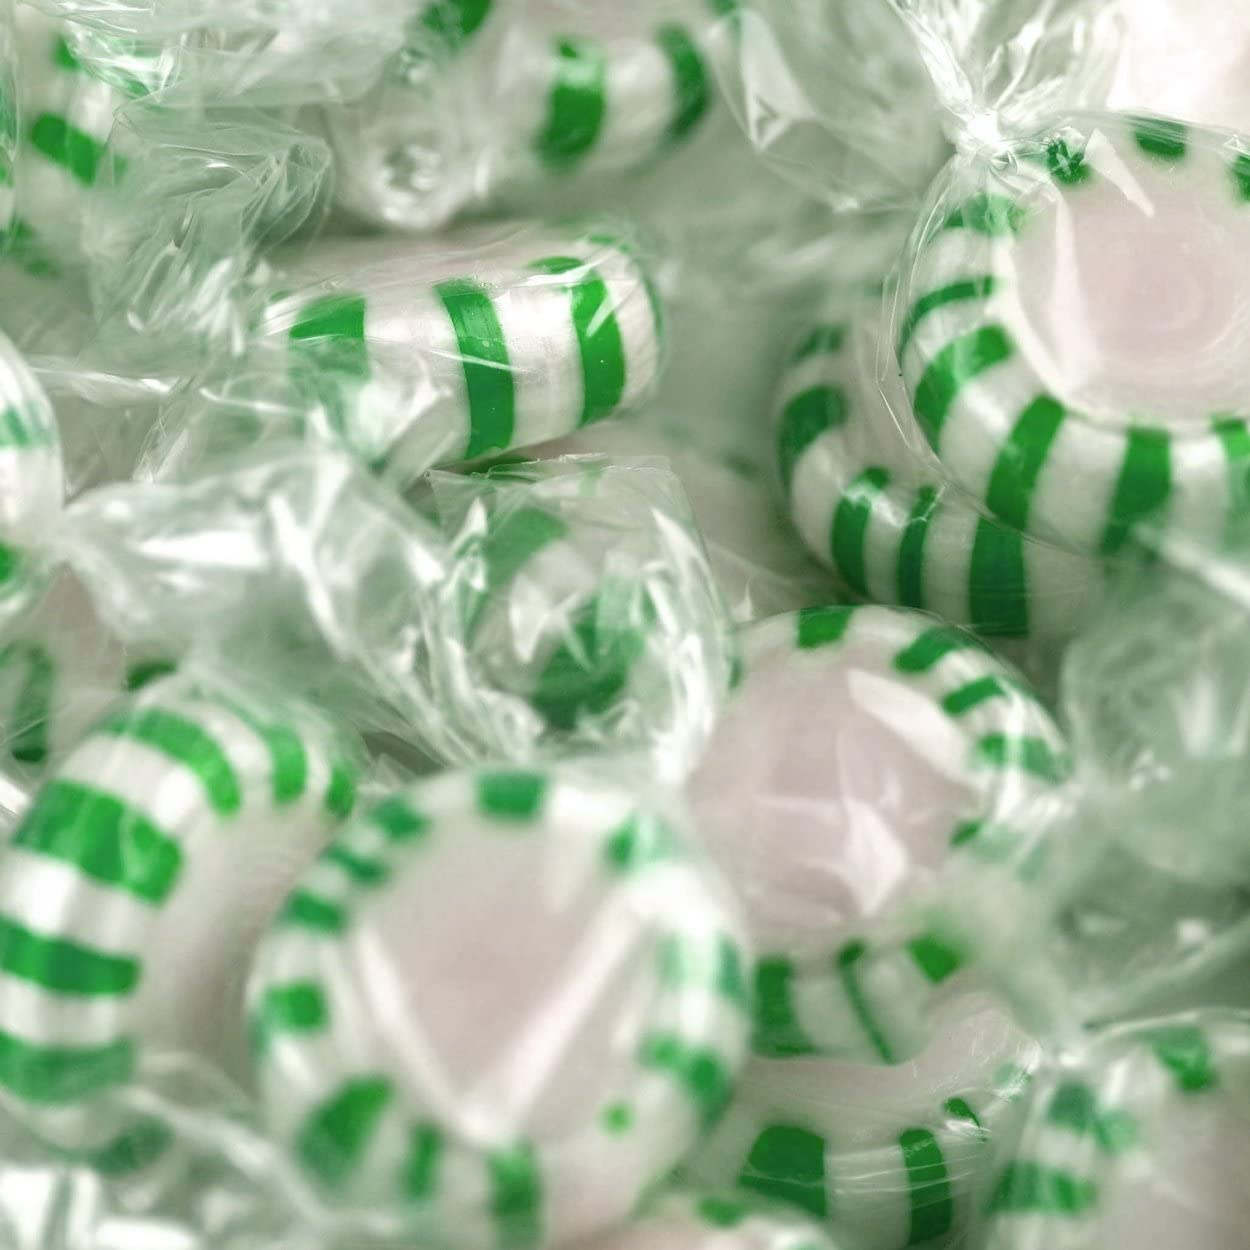 Starlight Mints - 4 LB Bulk Hard Candies - Mint Candy - Green and White Earth Day Candy